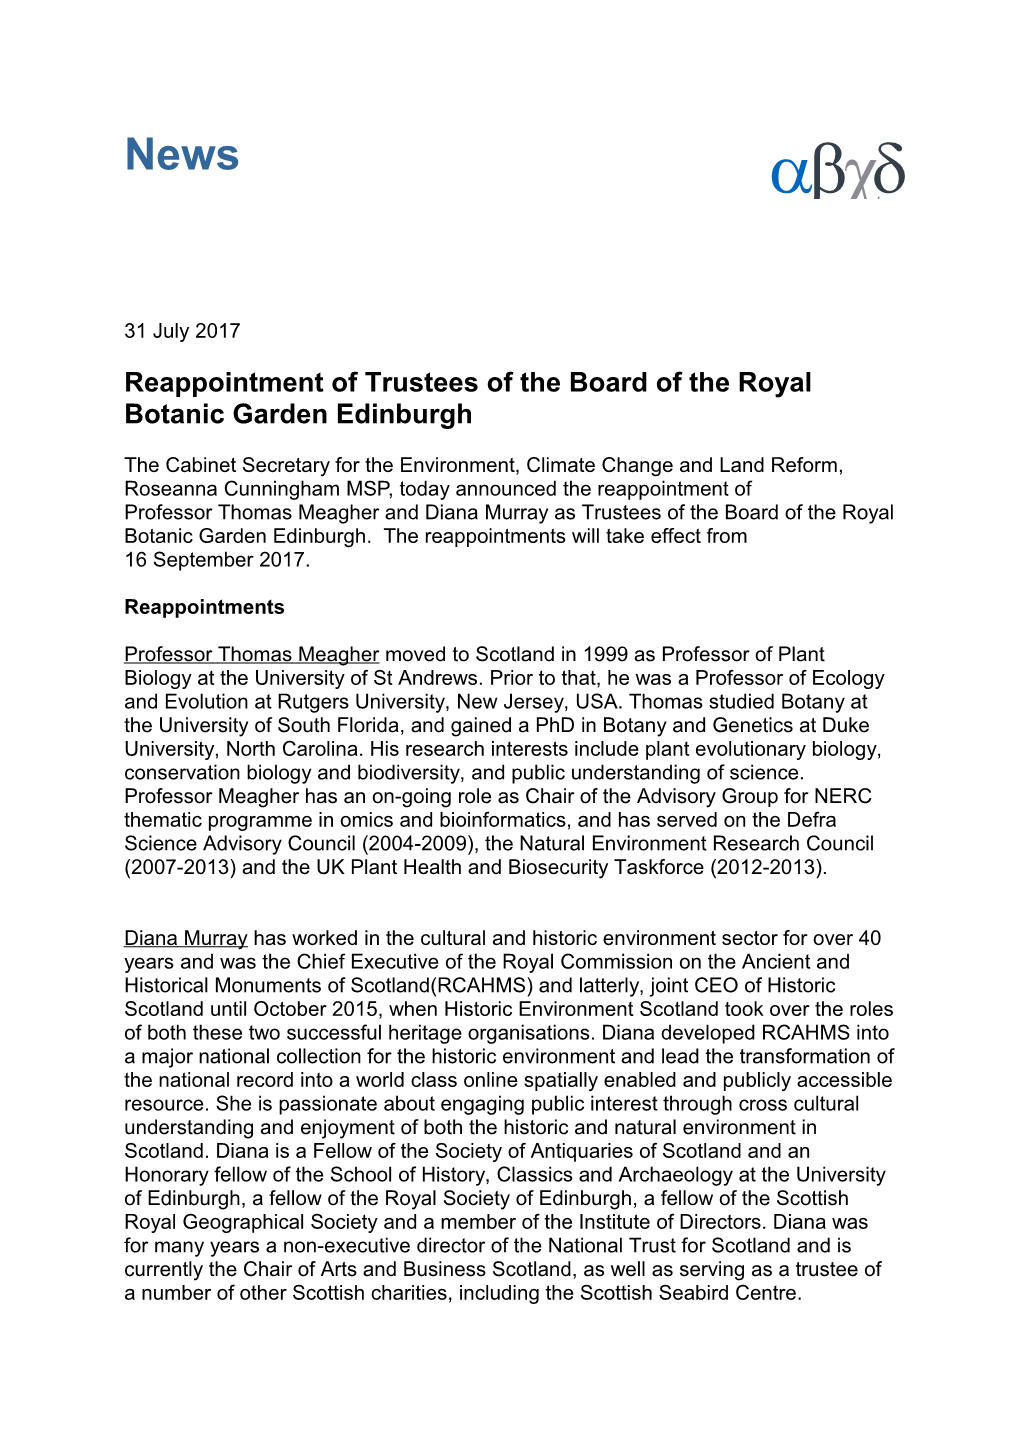 Reappointment of Trustees of the Board of the Royal Botanic Garden Edinburgh